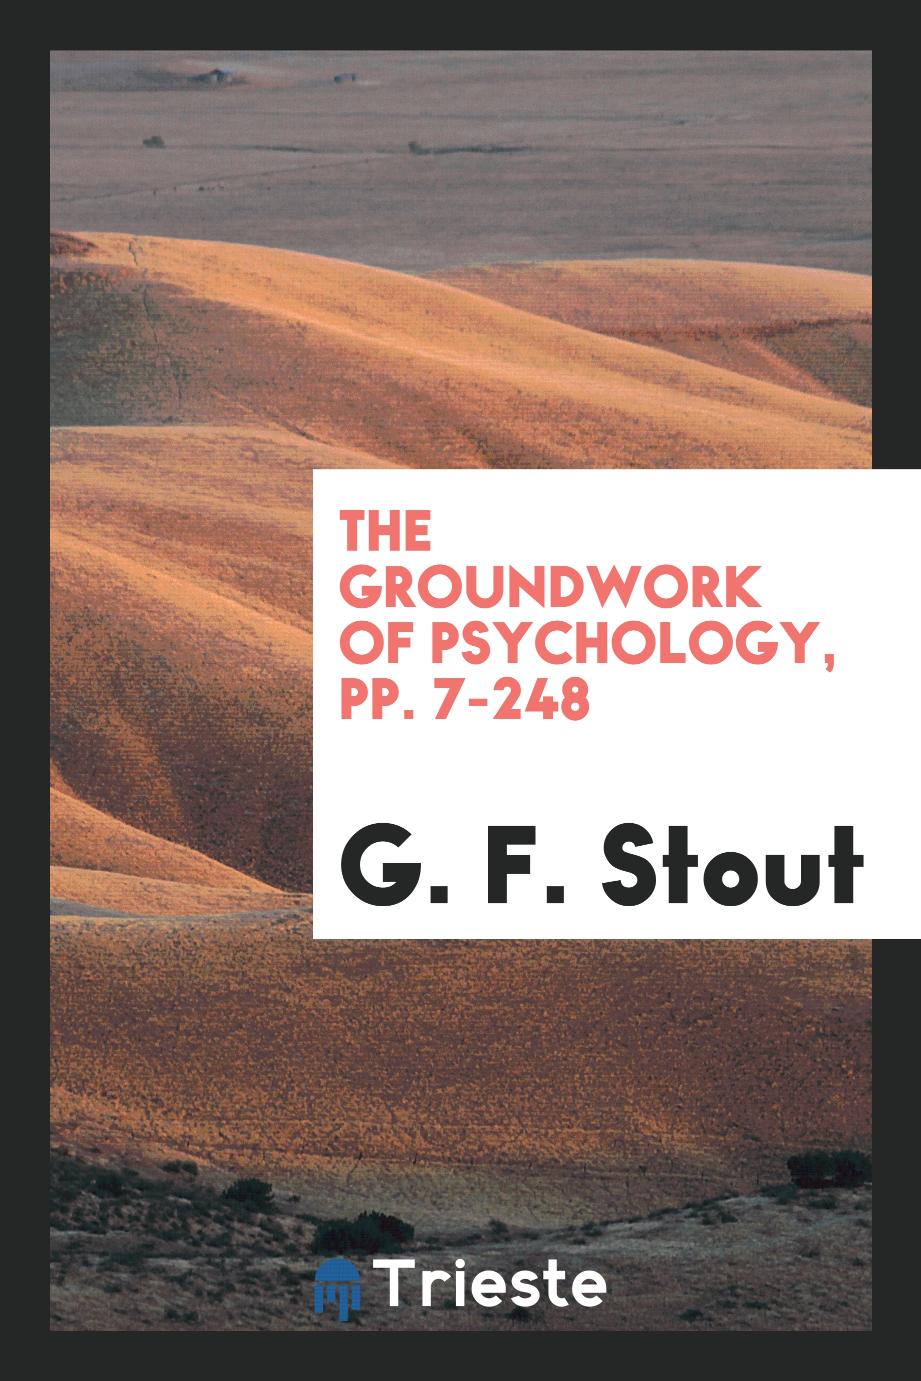 The Groundwork of Psychology, pp. 7-248